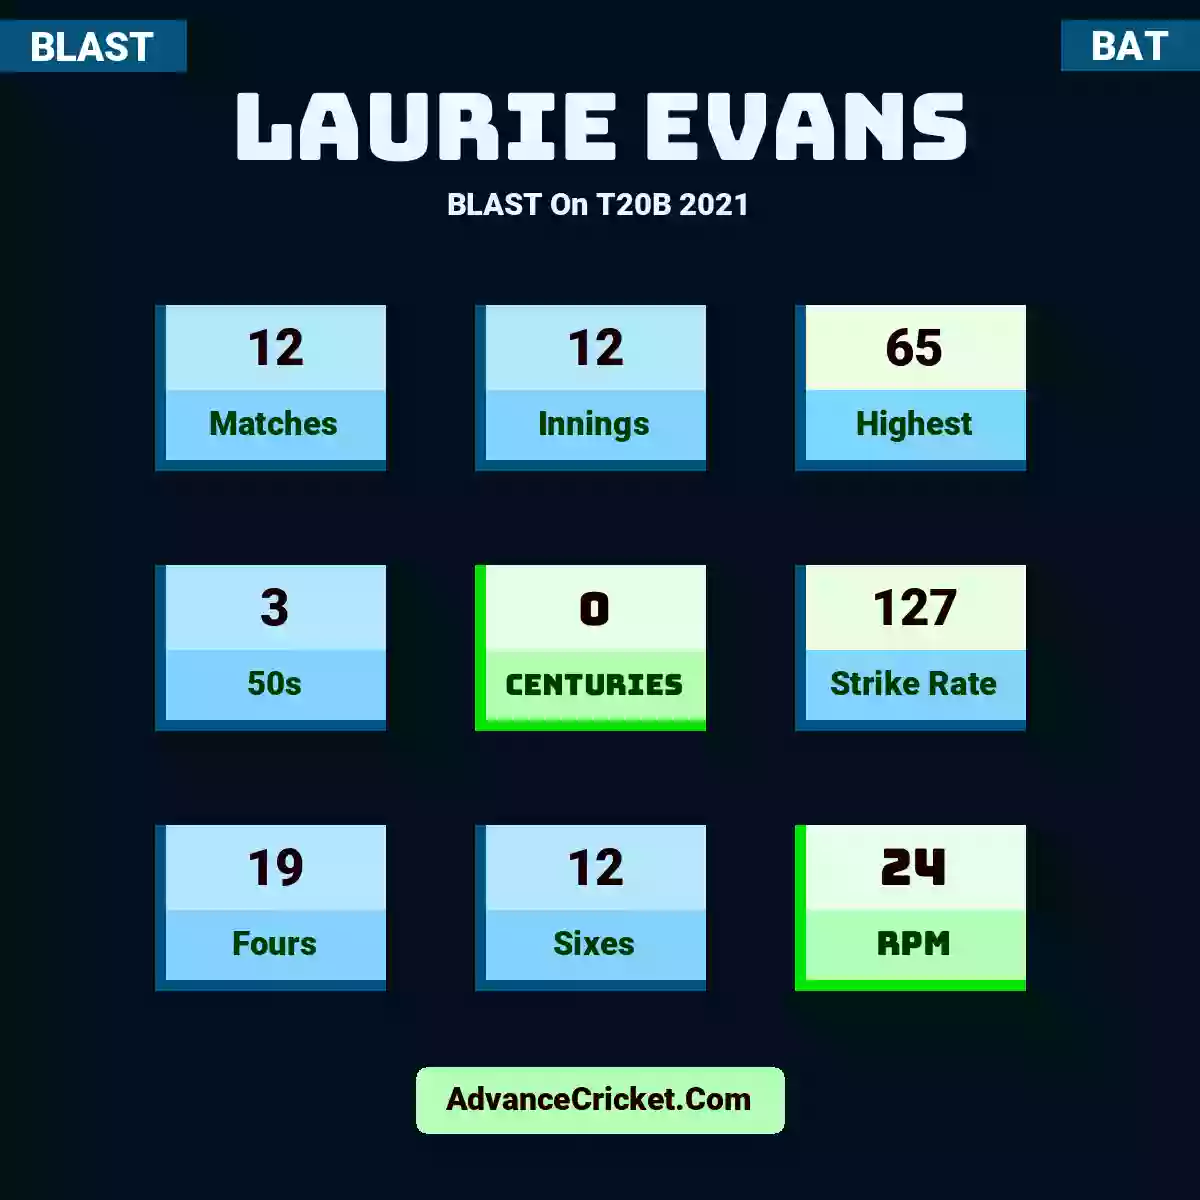 Laurie Evans BLAST  On T20B 2021, Laurie Evans played 12 matches, scored 65 runs as highest, 3 half-centuries, and 0 centuries, with a strike rate of 127. L.Evans hit 19 fours and 12 sixes, with an RPM of 24.